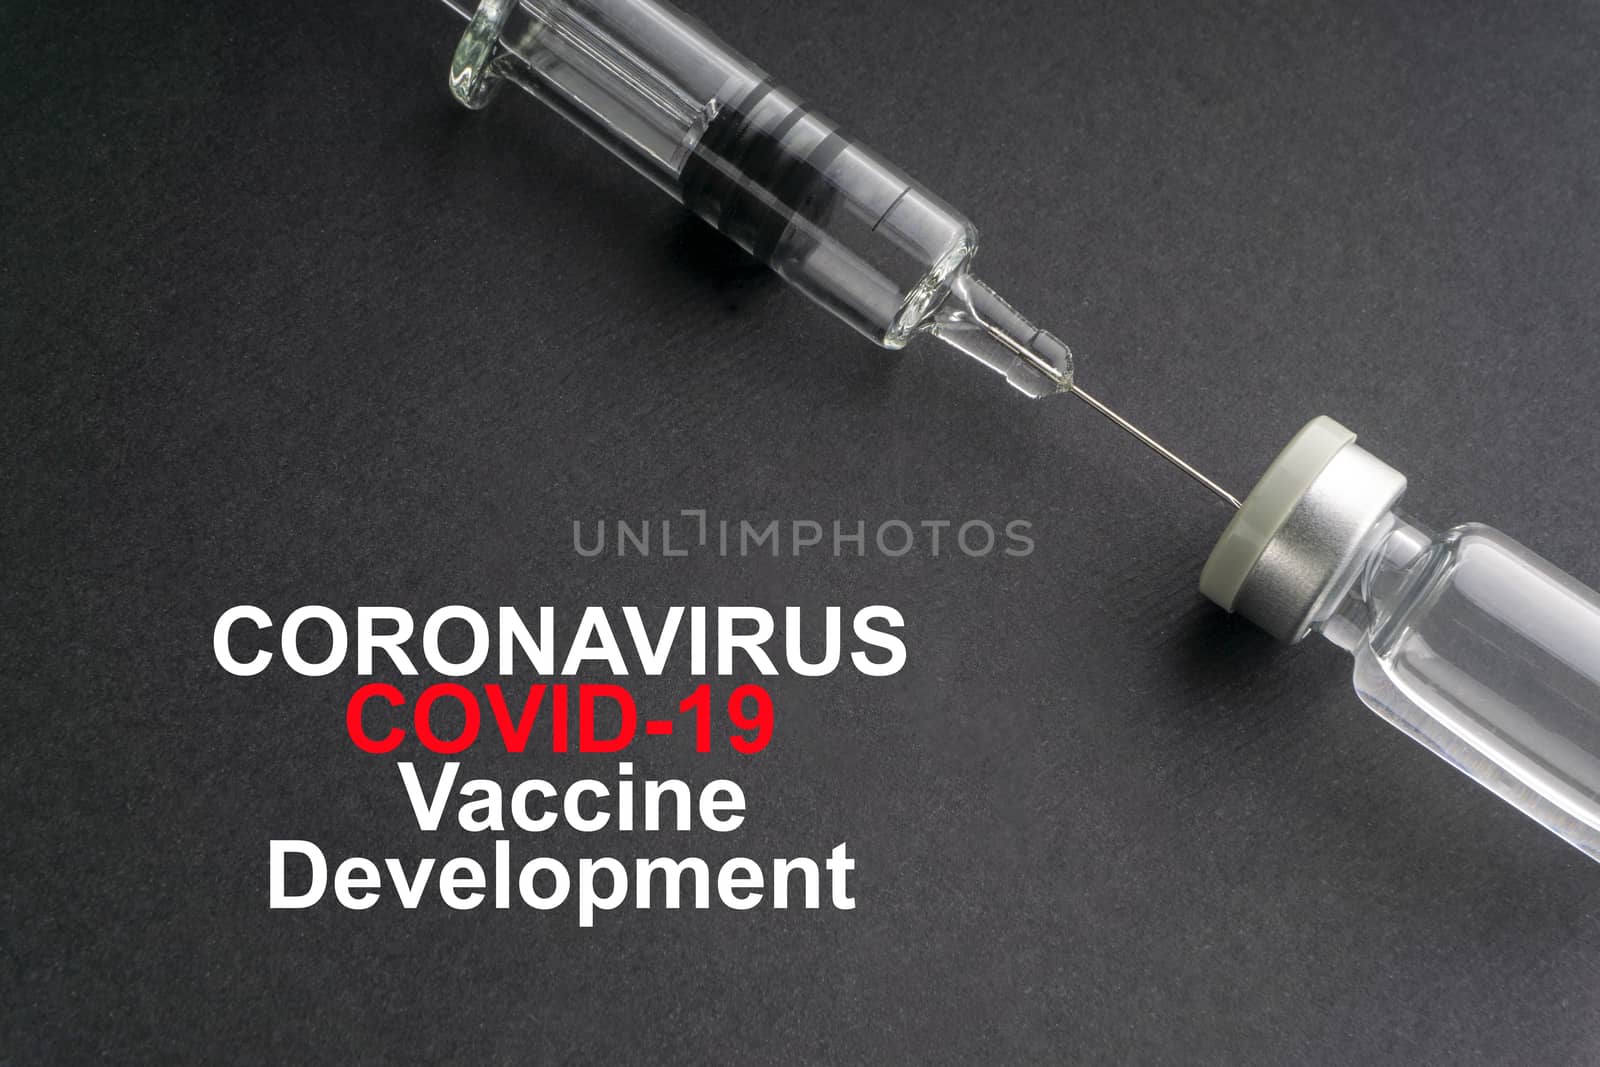 CORONAVIRUS COVID-19 VACCINE DEVELOPMENT text with syringe and vials on black background by silverwings